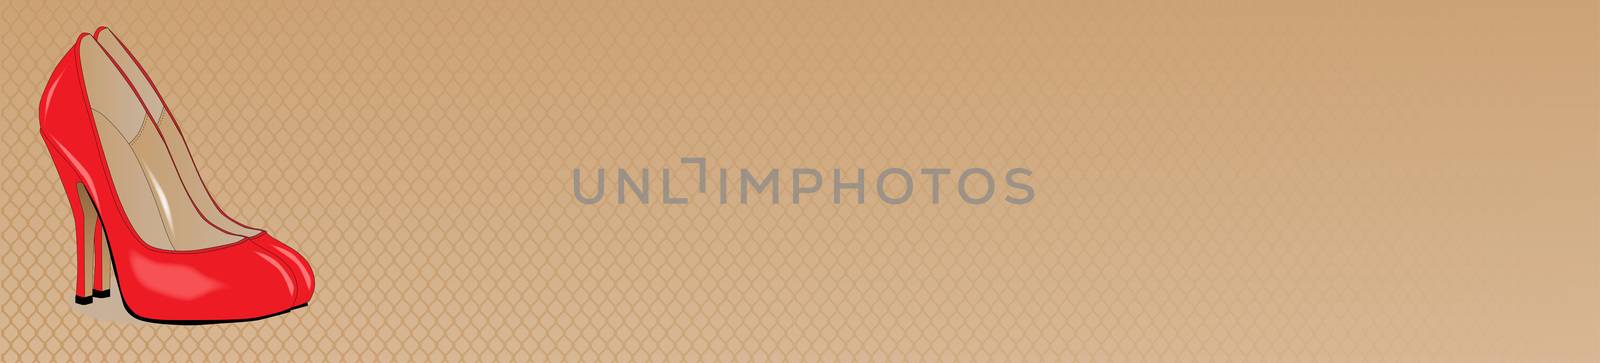 A pair of red stiletto heel shoes as a website banner set against a nylon stocking mesh background